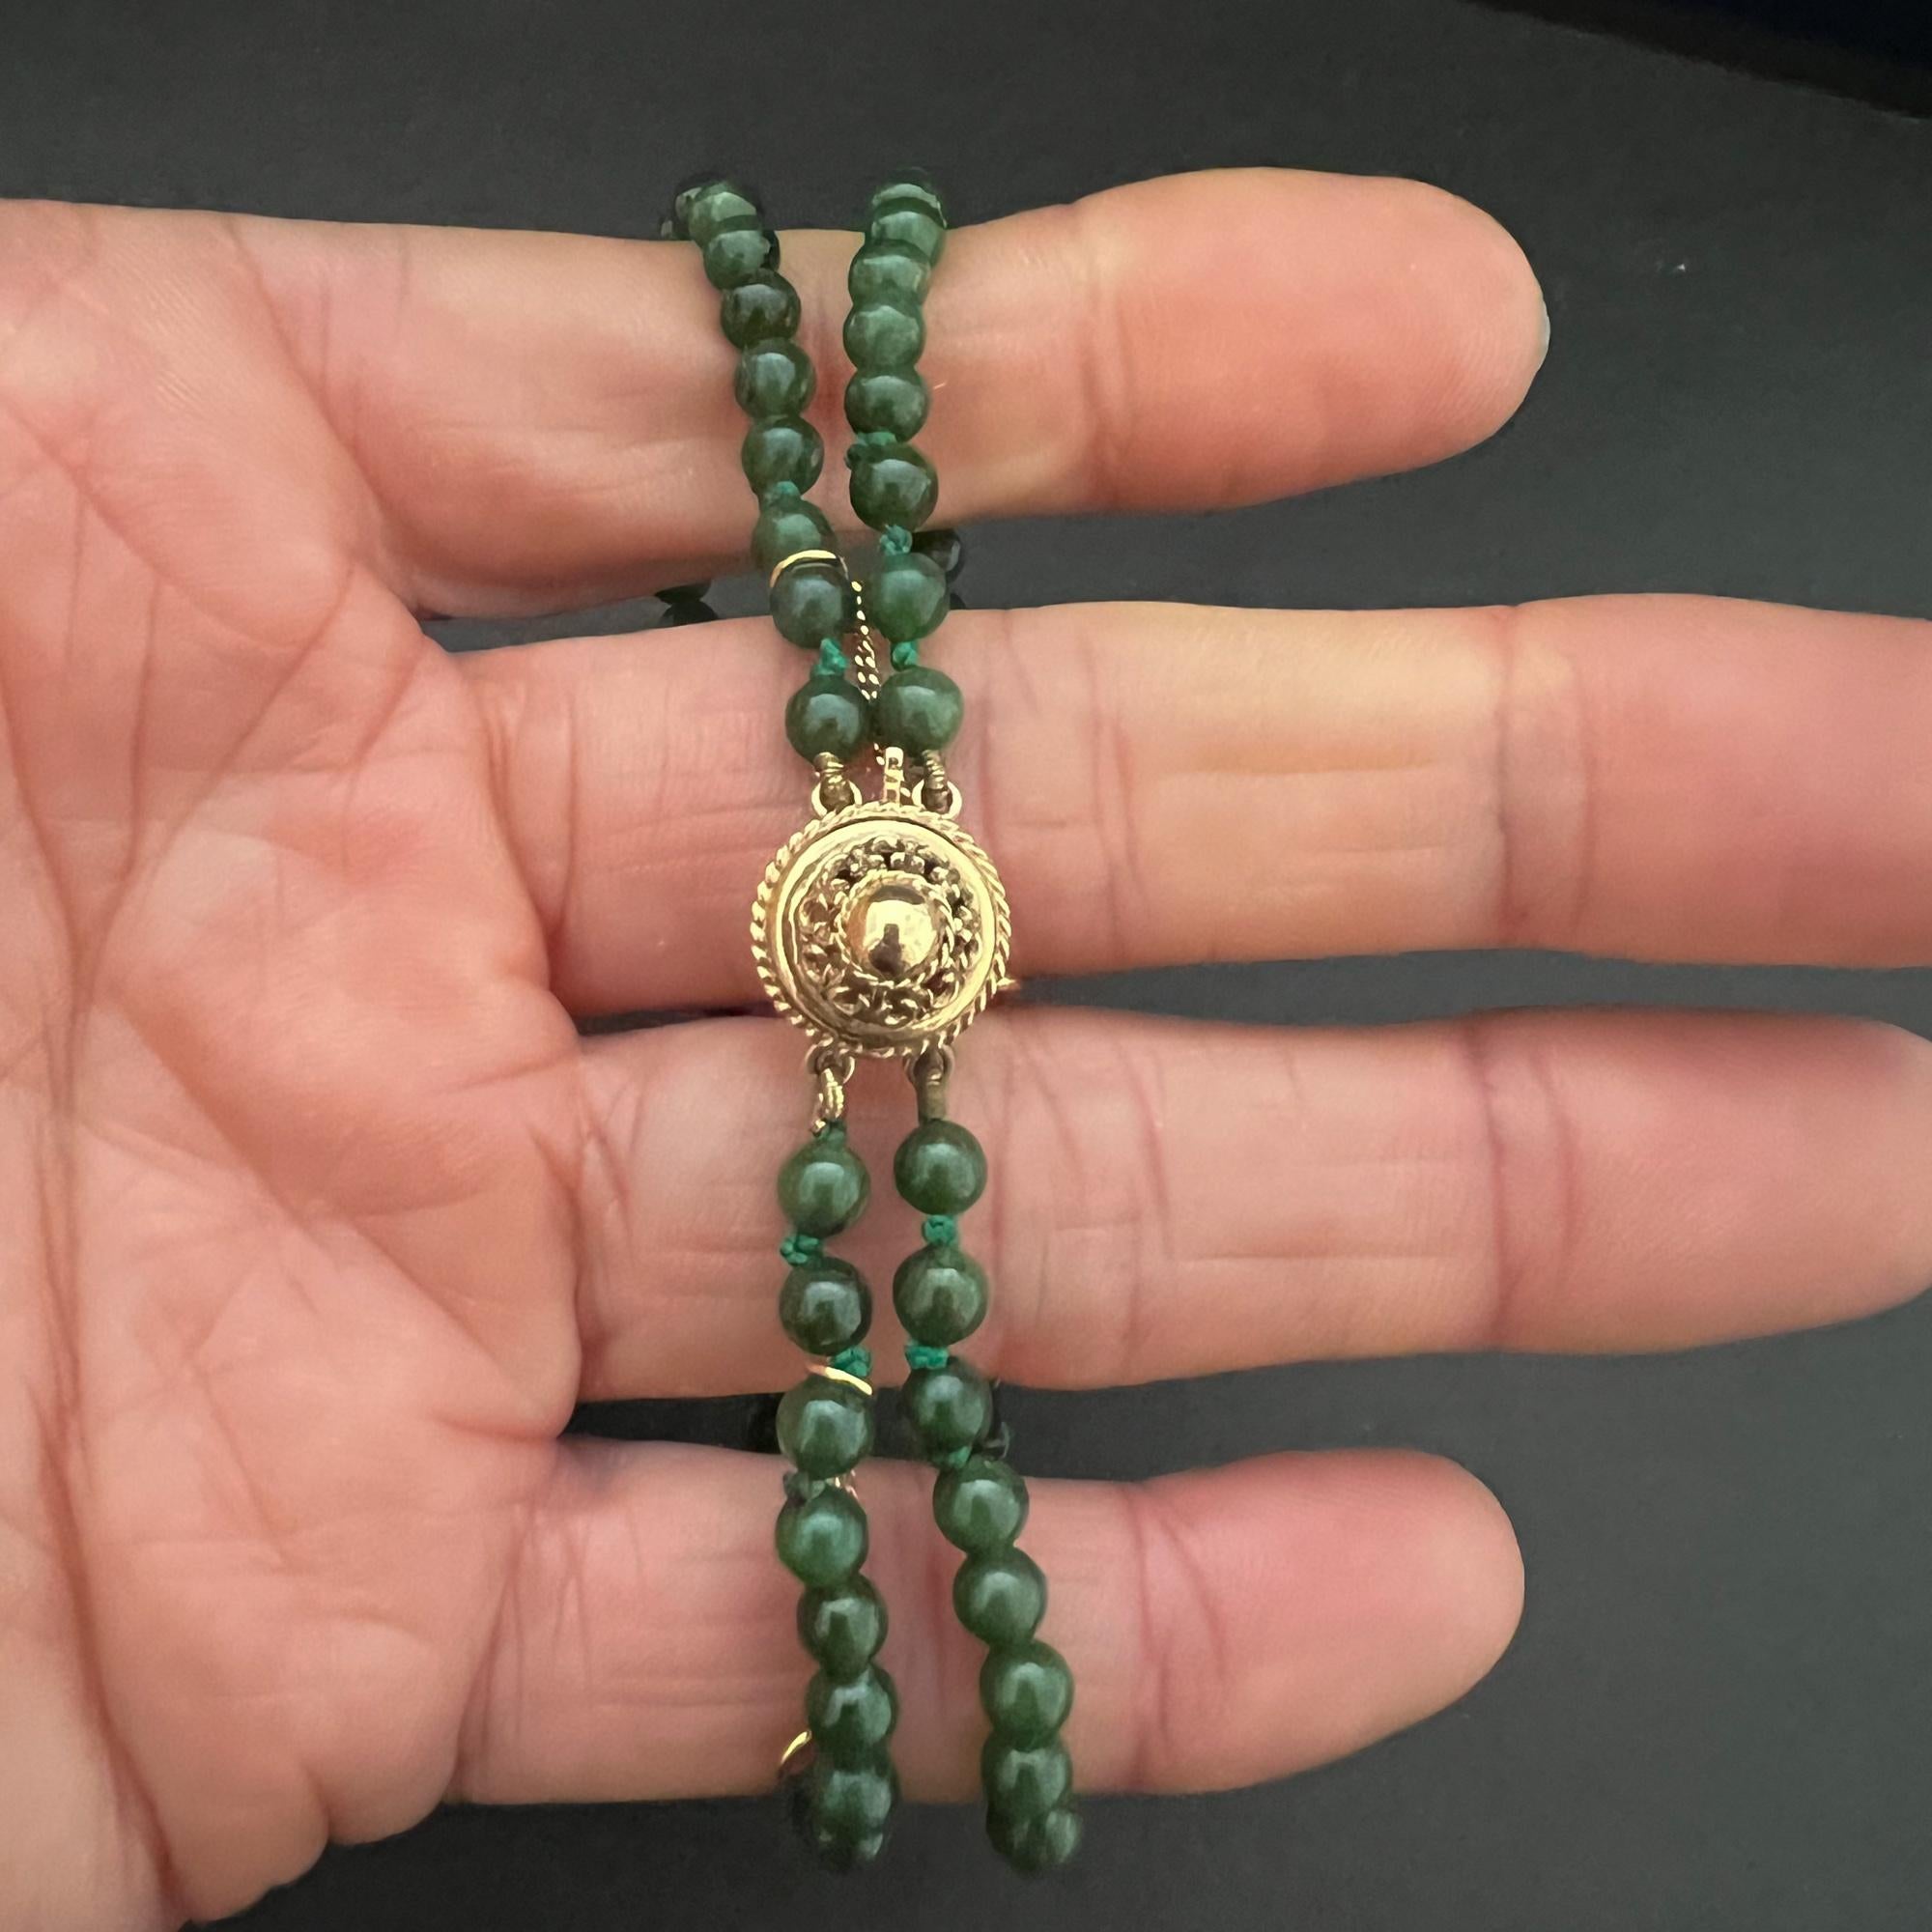 A natural jade 14 karat gold two-strand beaded bracelet. The jade beads of this bracelet are round-shaped and are beautifully mottled with different hues of dark green. The round gold clasp has a fine openwork structure with a gold dome in the